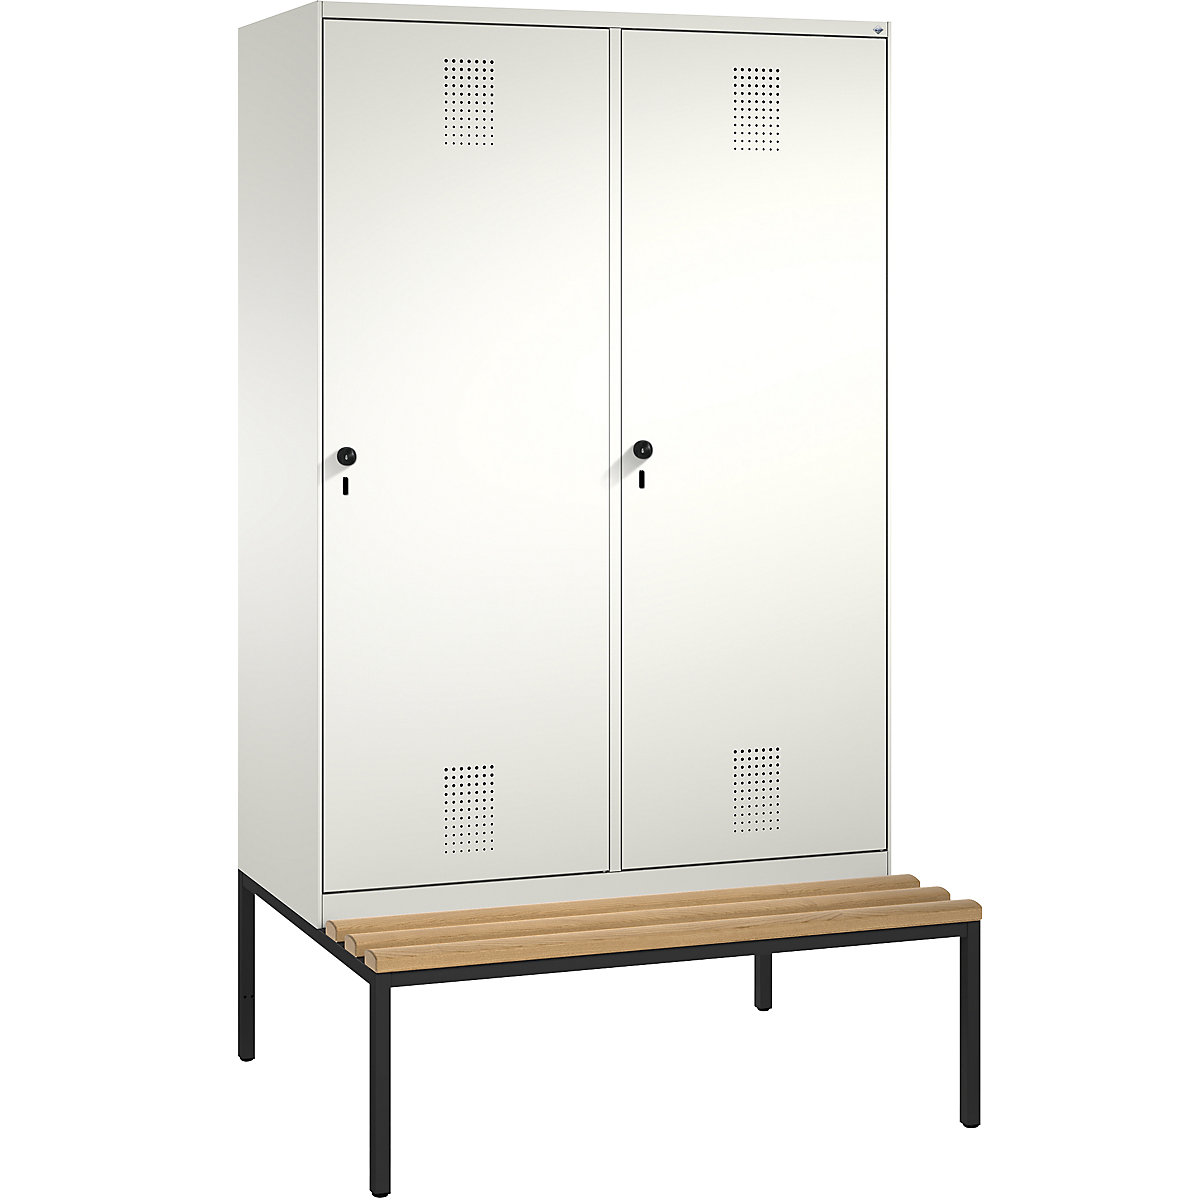 EVOLO cloakroom locker, with bench, door for 2 compartments – C+P, 4 compartments, 2 doors, compartment width 300 mm, pure white / pure white-10